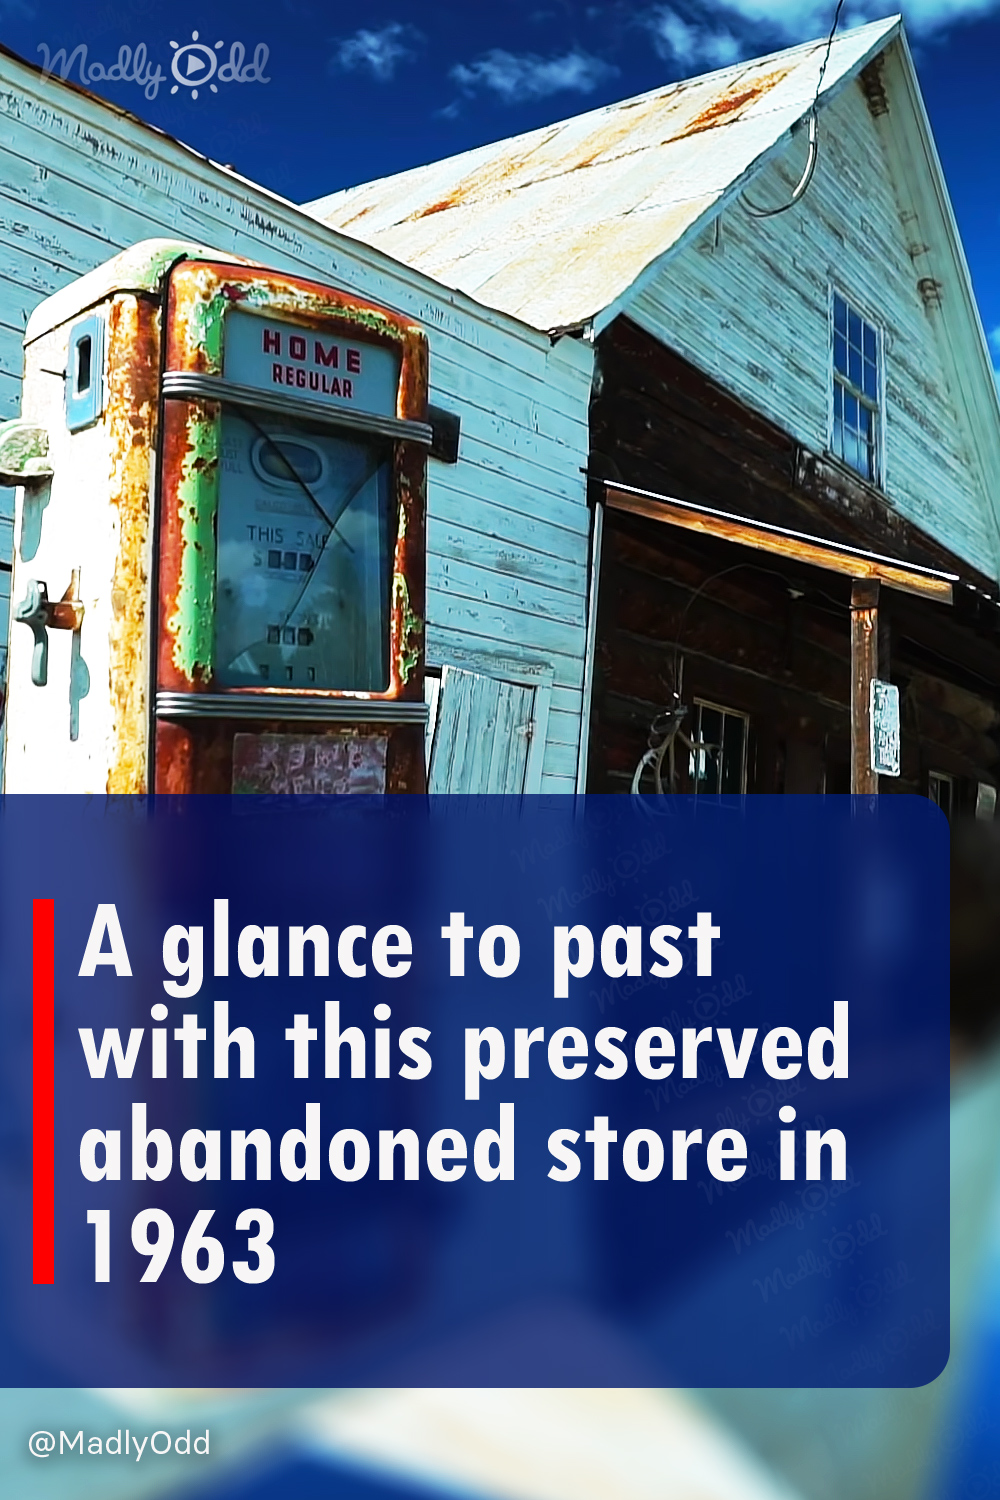 A glance to past with this preserved abandoned store in 1963